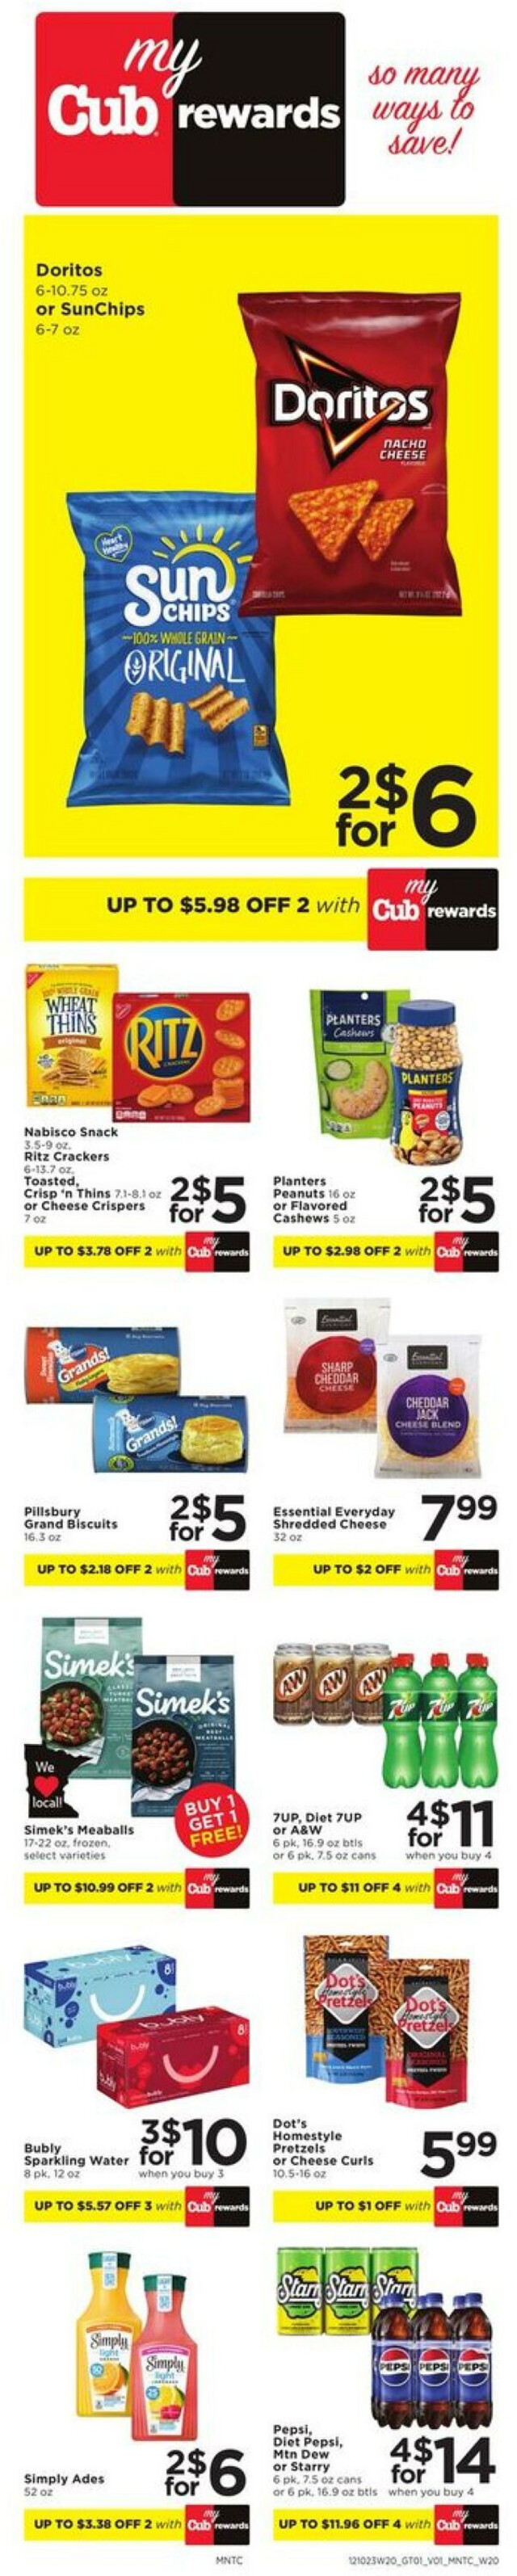 Cub Foods Ad from 12/10/2023